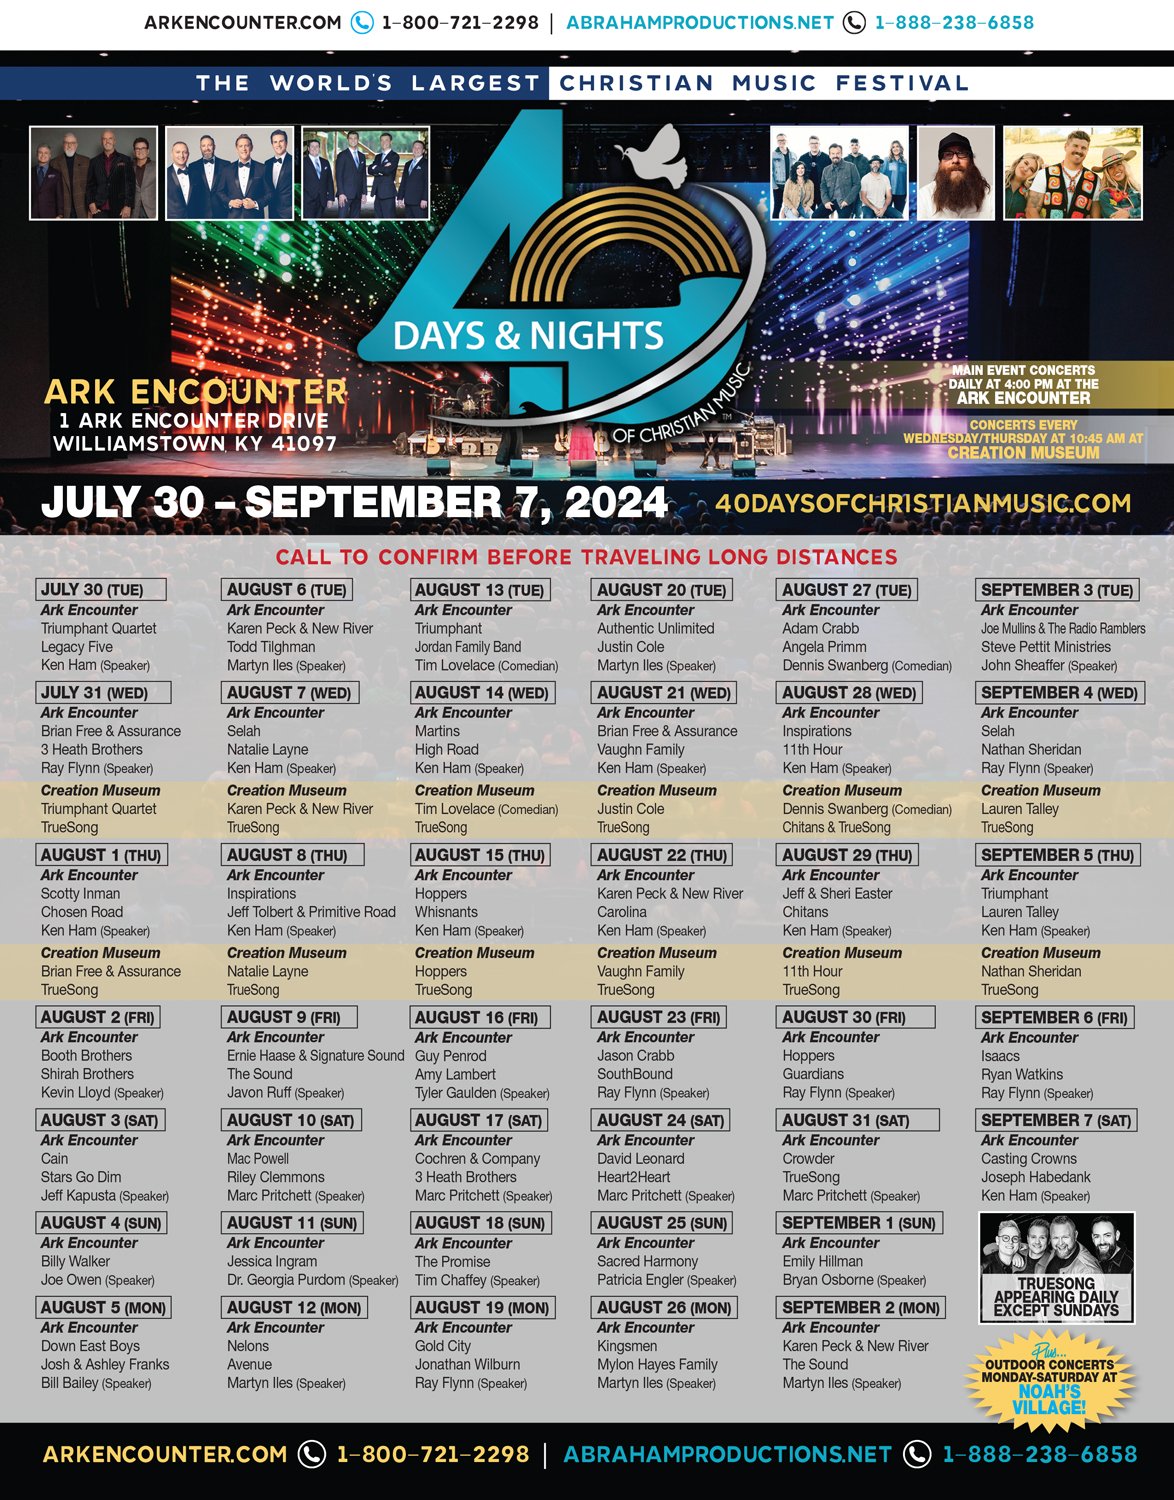 40 Days and 40 Nights of Christian Music schedule